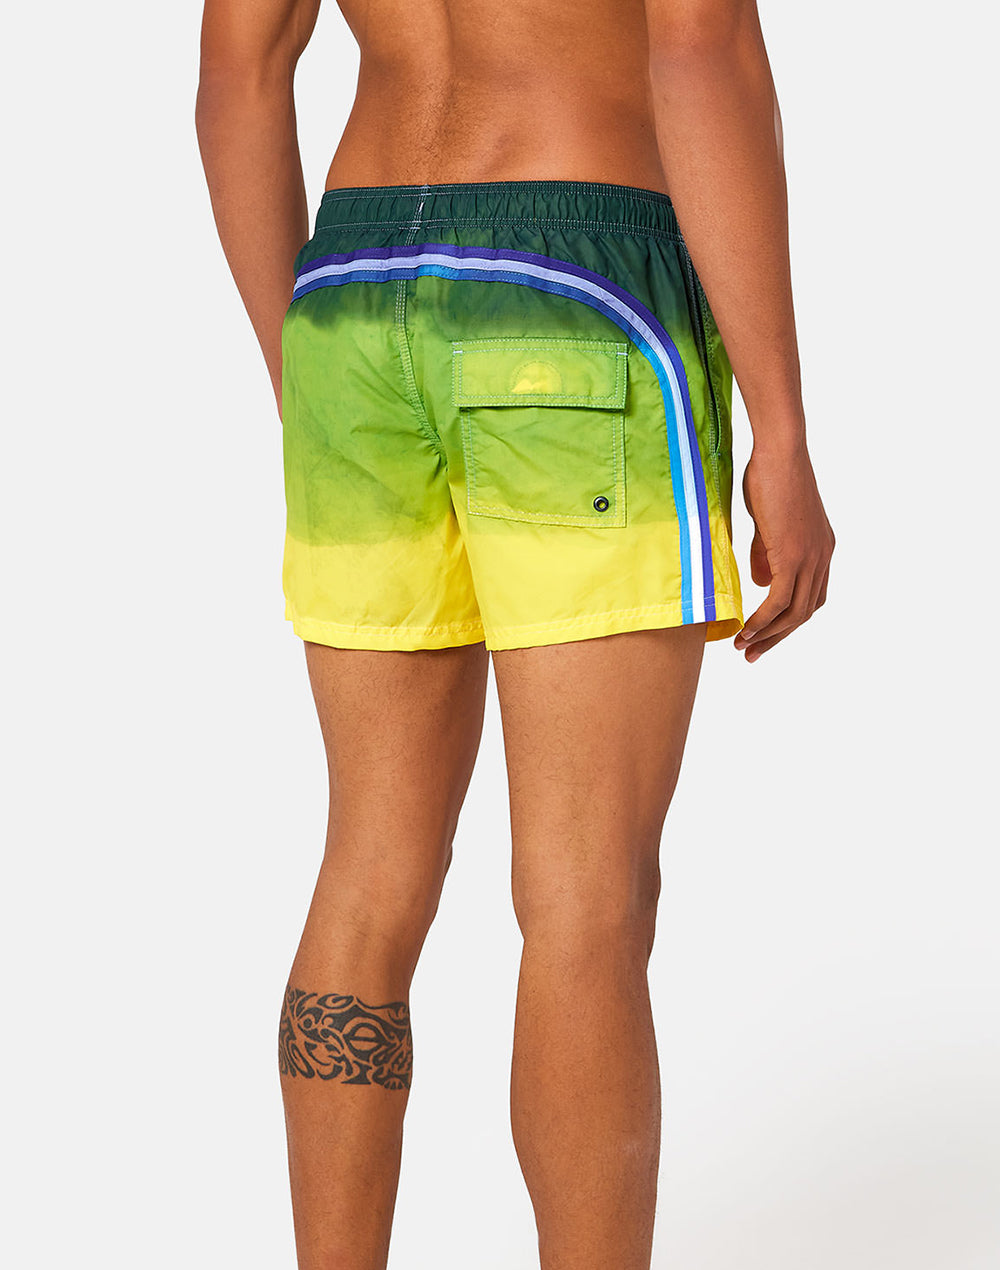 SHORT SWIM SHORTS WITH AN ELASTICATED WAISTBAND - GOLDENWAVE SPECIAL EDITION